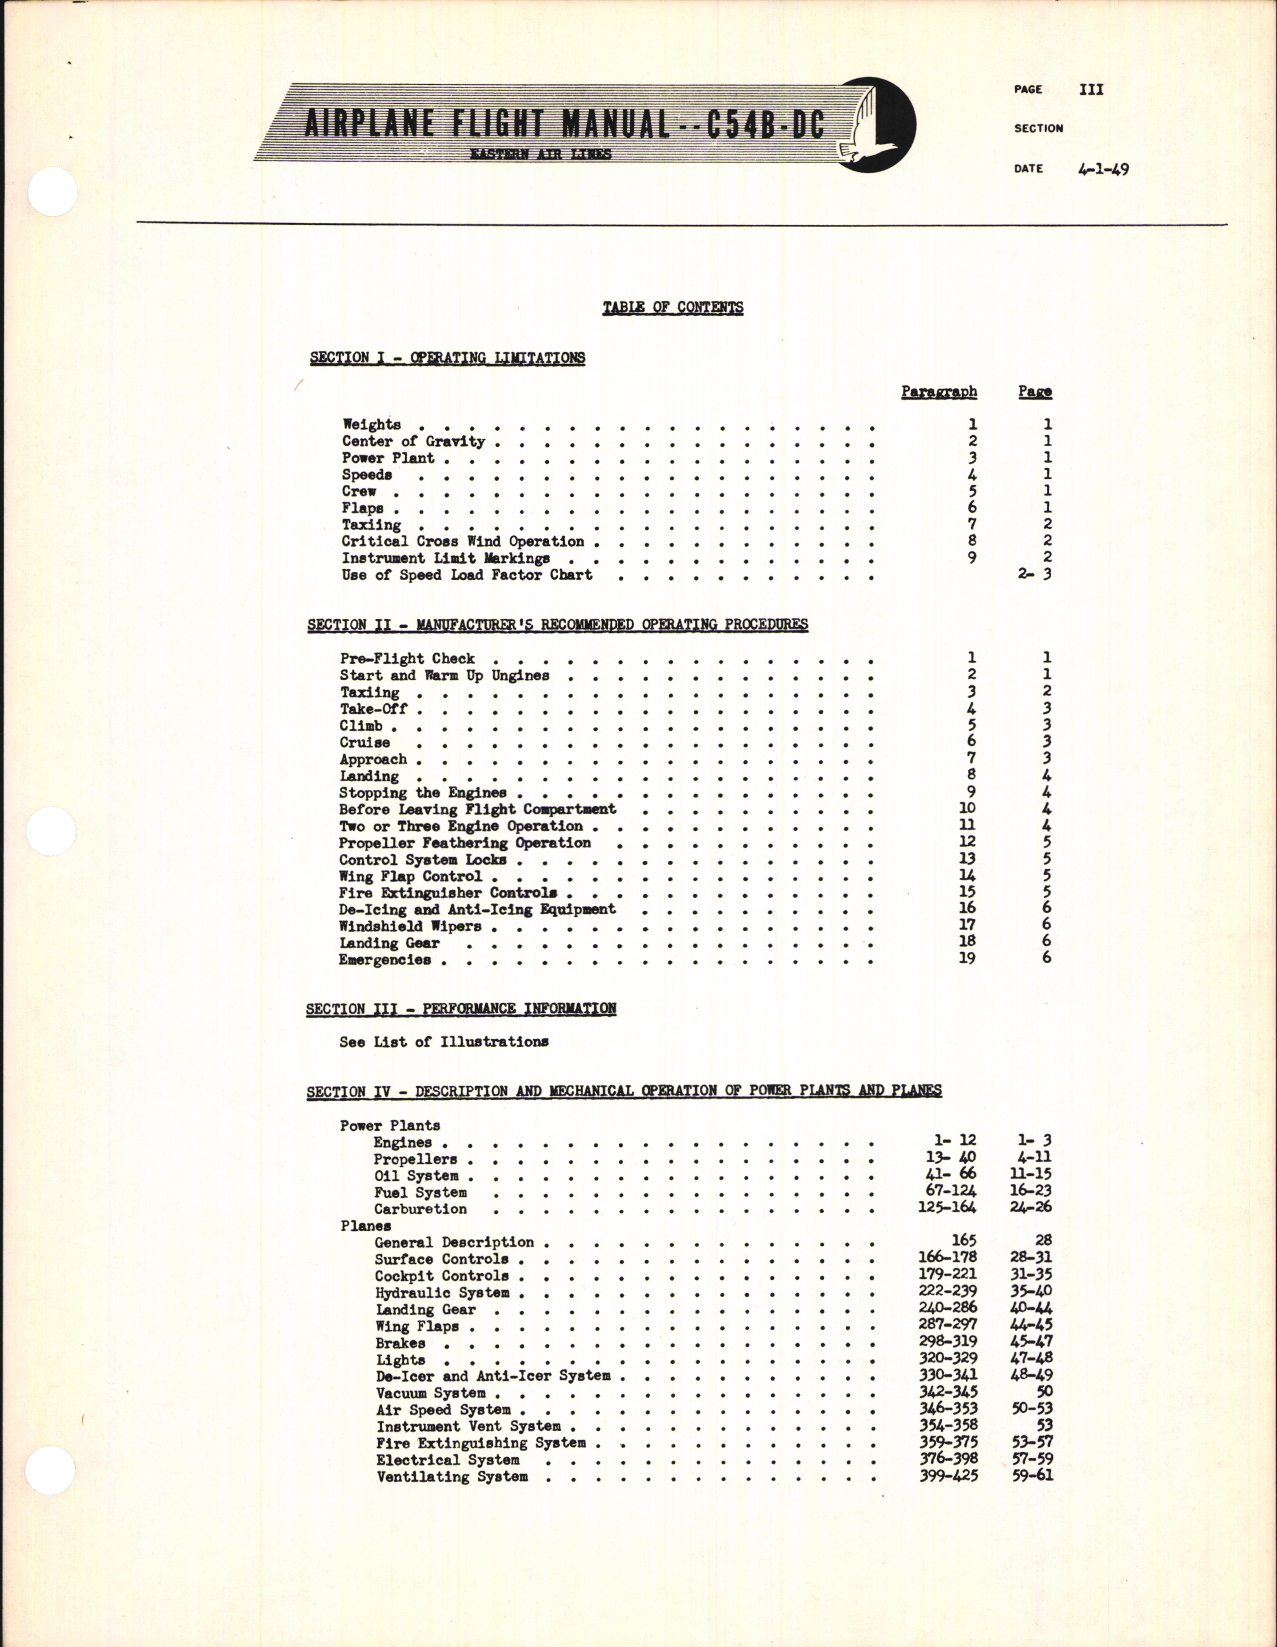 Sample page 5 from AirCorps Library document: Airplane Flight Manual for C-54B-DC